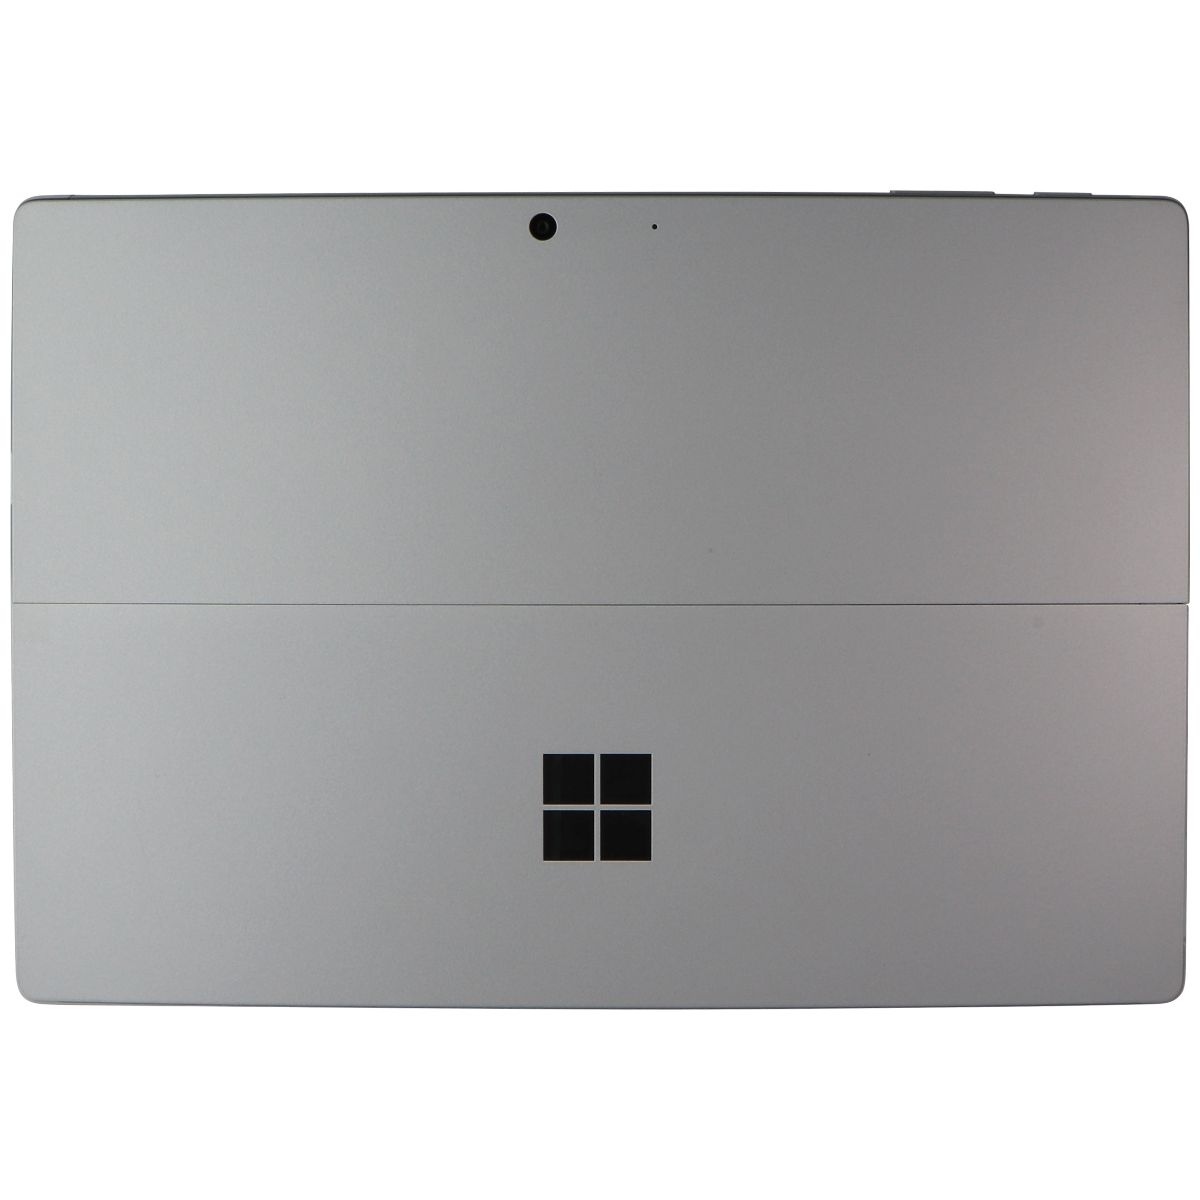 Microsoft Surface Pro 7 (12.3-in) Tablet (1866) i7-1065G7/16GB/256GB - Platinum Laptops - PC Laptops & Netbooks Microsoft    - Simple Cell Bulk Wholesale Pricing - USA Seller